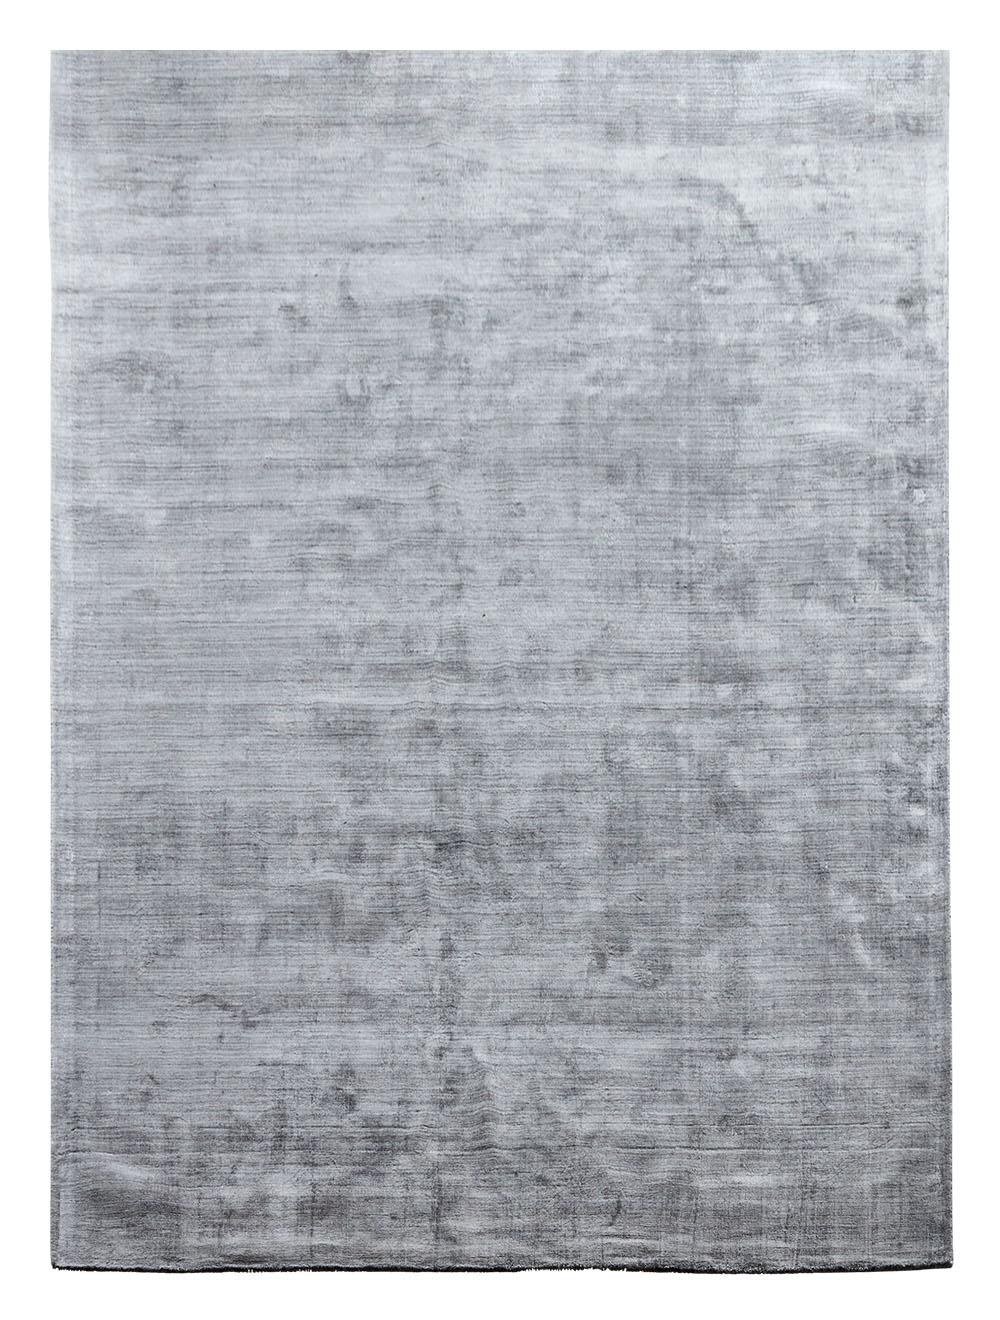 Light grey Karma Carpet by Massimo Copenhagen
Handwoven
Materials: 100% Recycled Bamboo
Dimensions: W 250 x H 350 cm
Available colors: Light Grey, Nougat Brown, Washed Blue, and Olive Green.
Other dimensions are available: 160x230 cm, 200x300